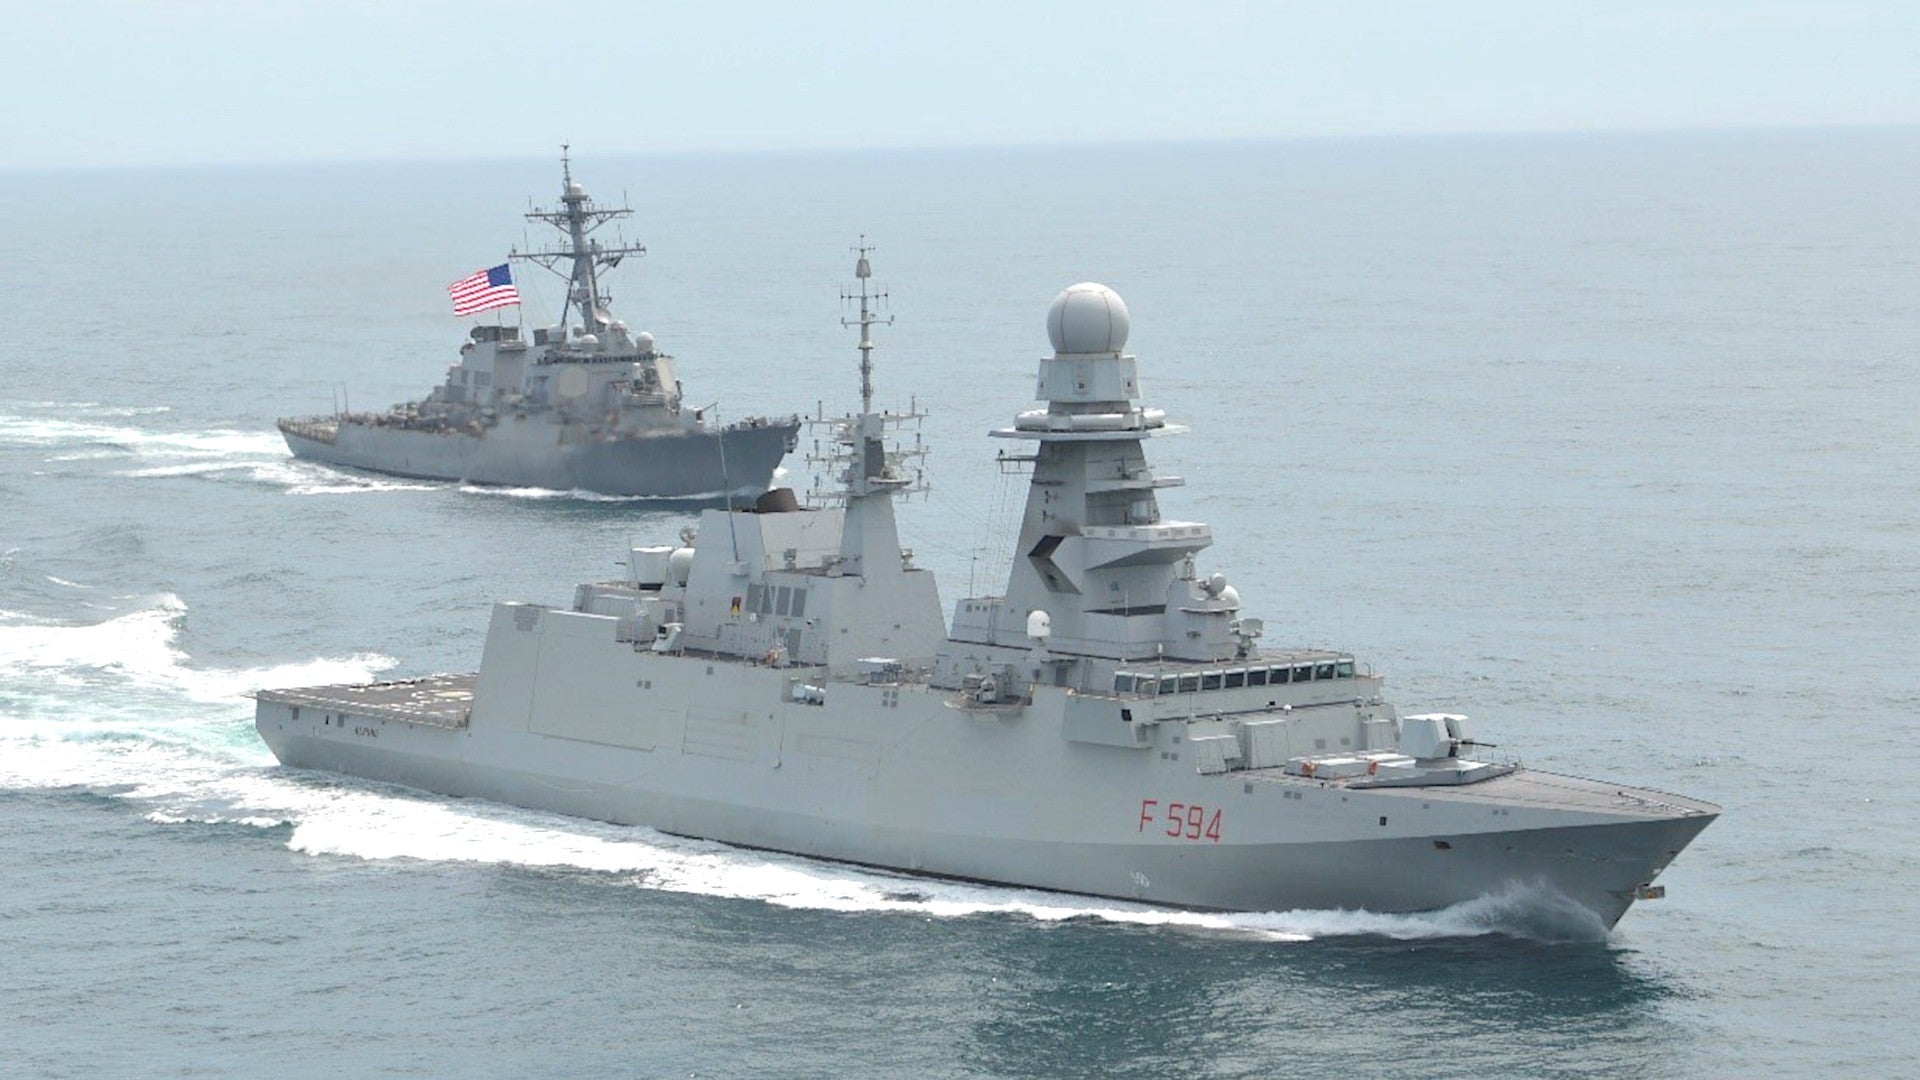 The Navy’s Future Frigates Are Shaping Up To Be More Lethal And Capable, As Well As Cheaper